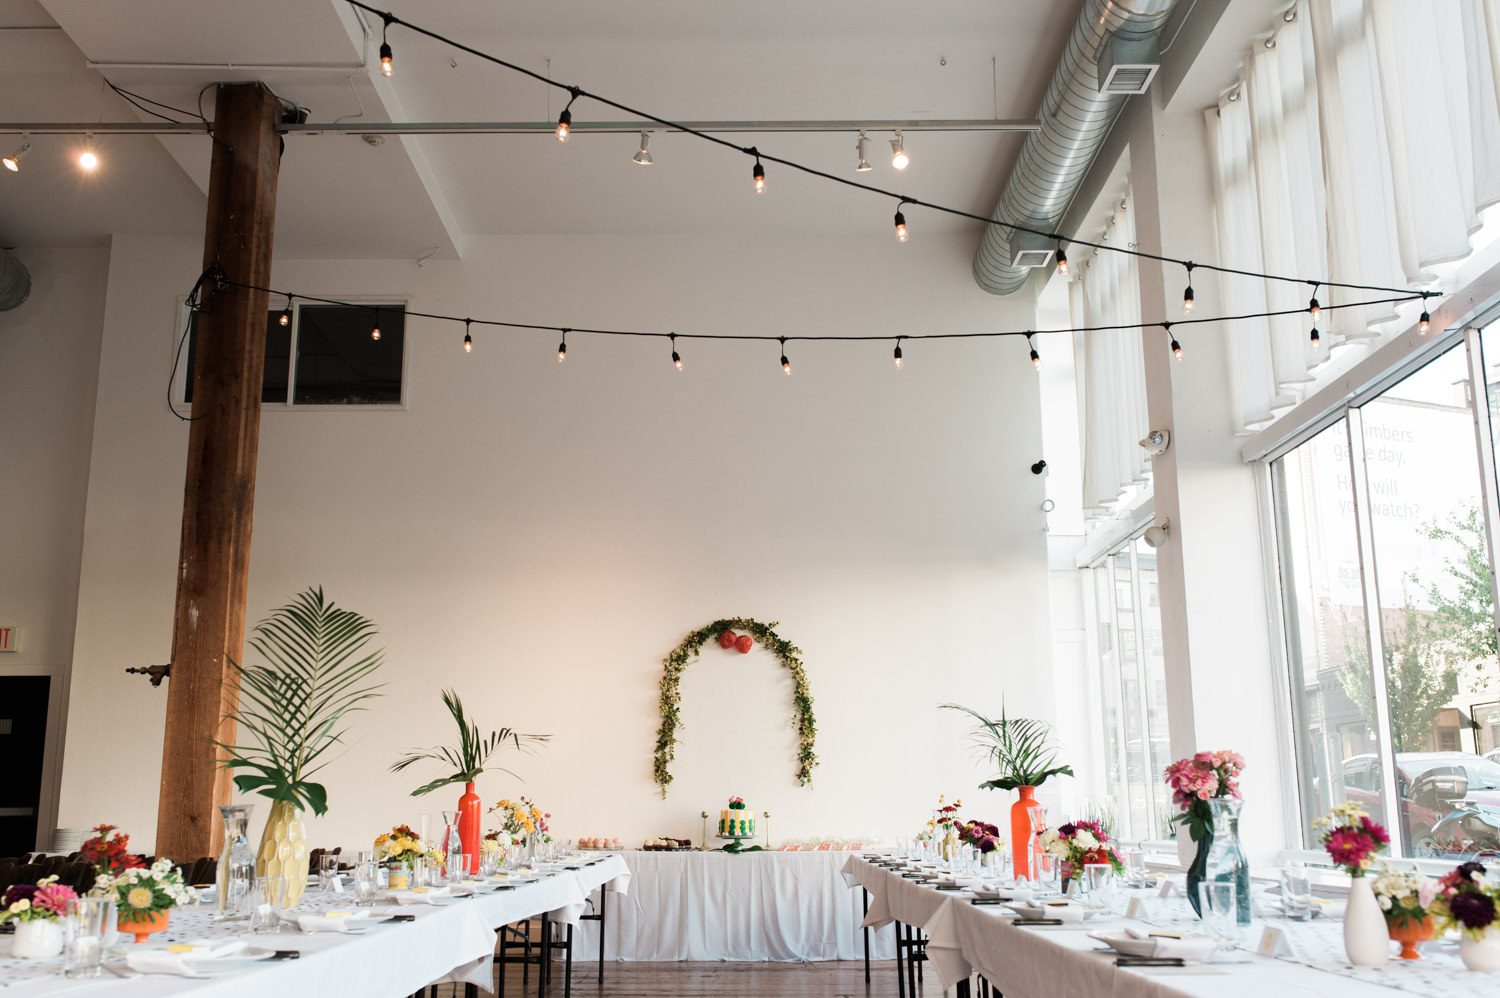 The Cleaners wedding venue styled by the bride. by Ace Hotel wedding photographer Briana Morrison